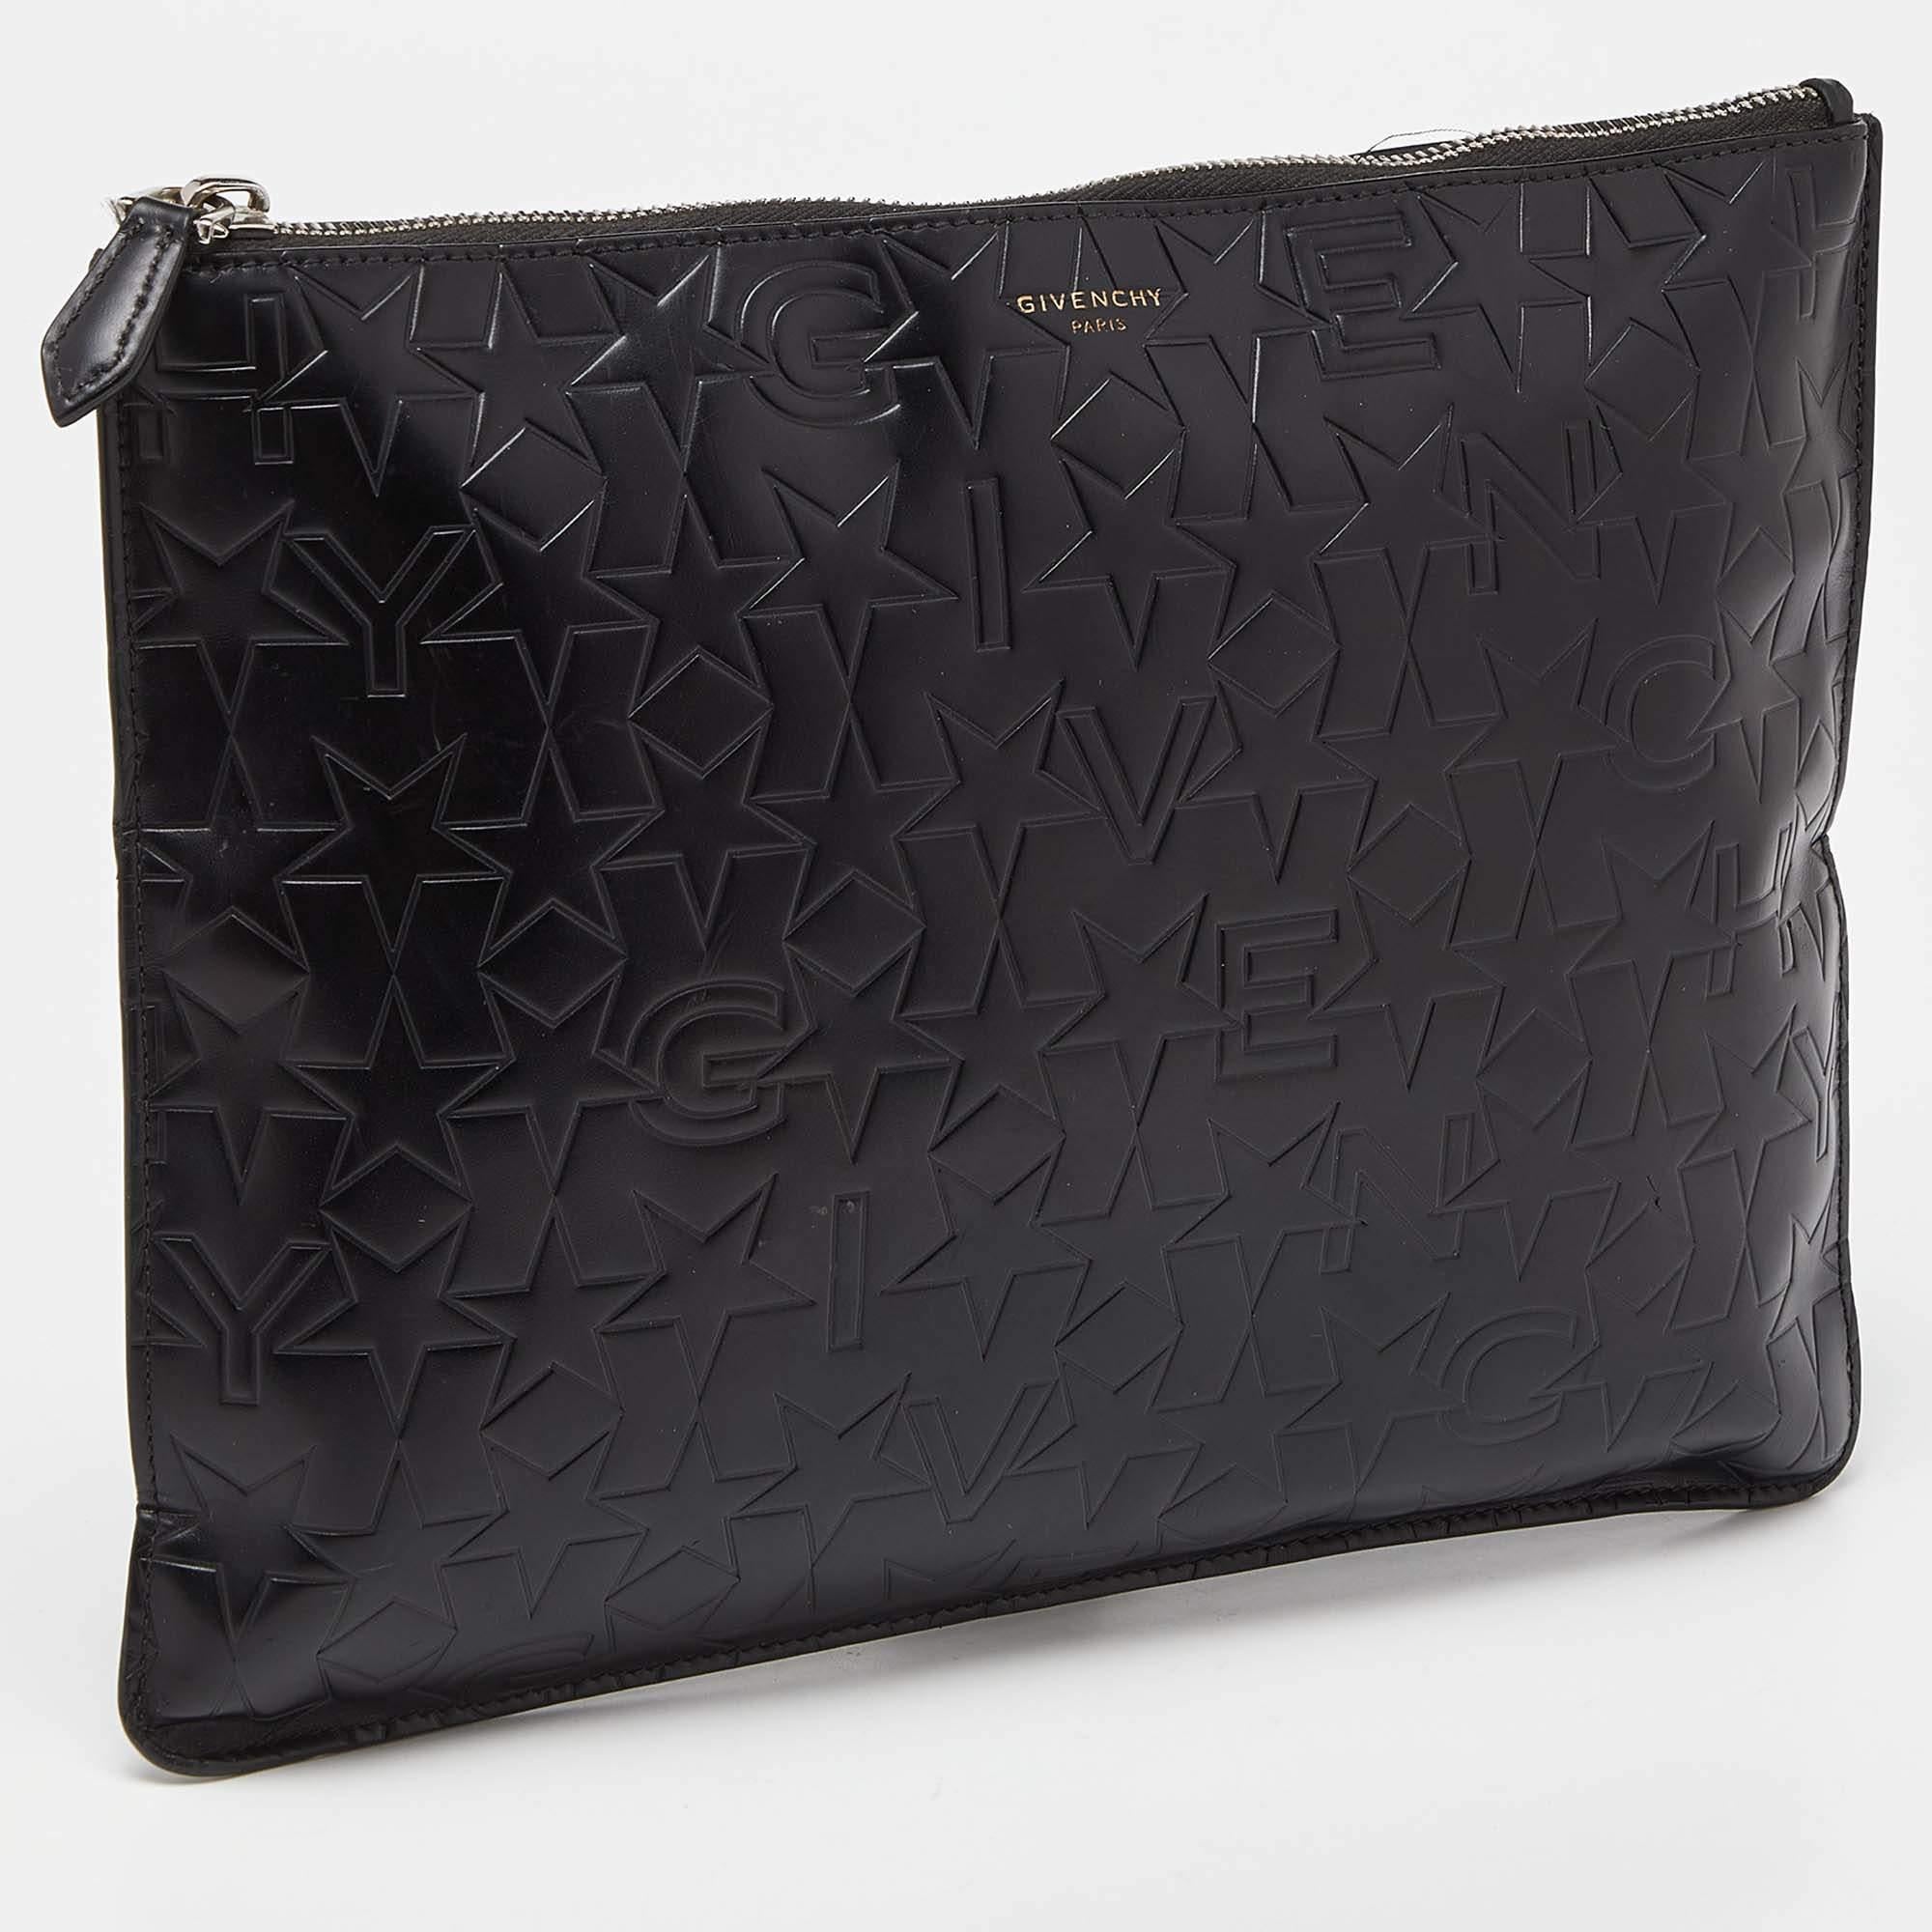 Givenchy Black Star Embossed Leather Zip Clutch In Good Condition For Sale In Dubai, Al Qouz 2